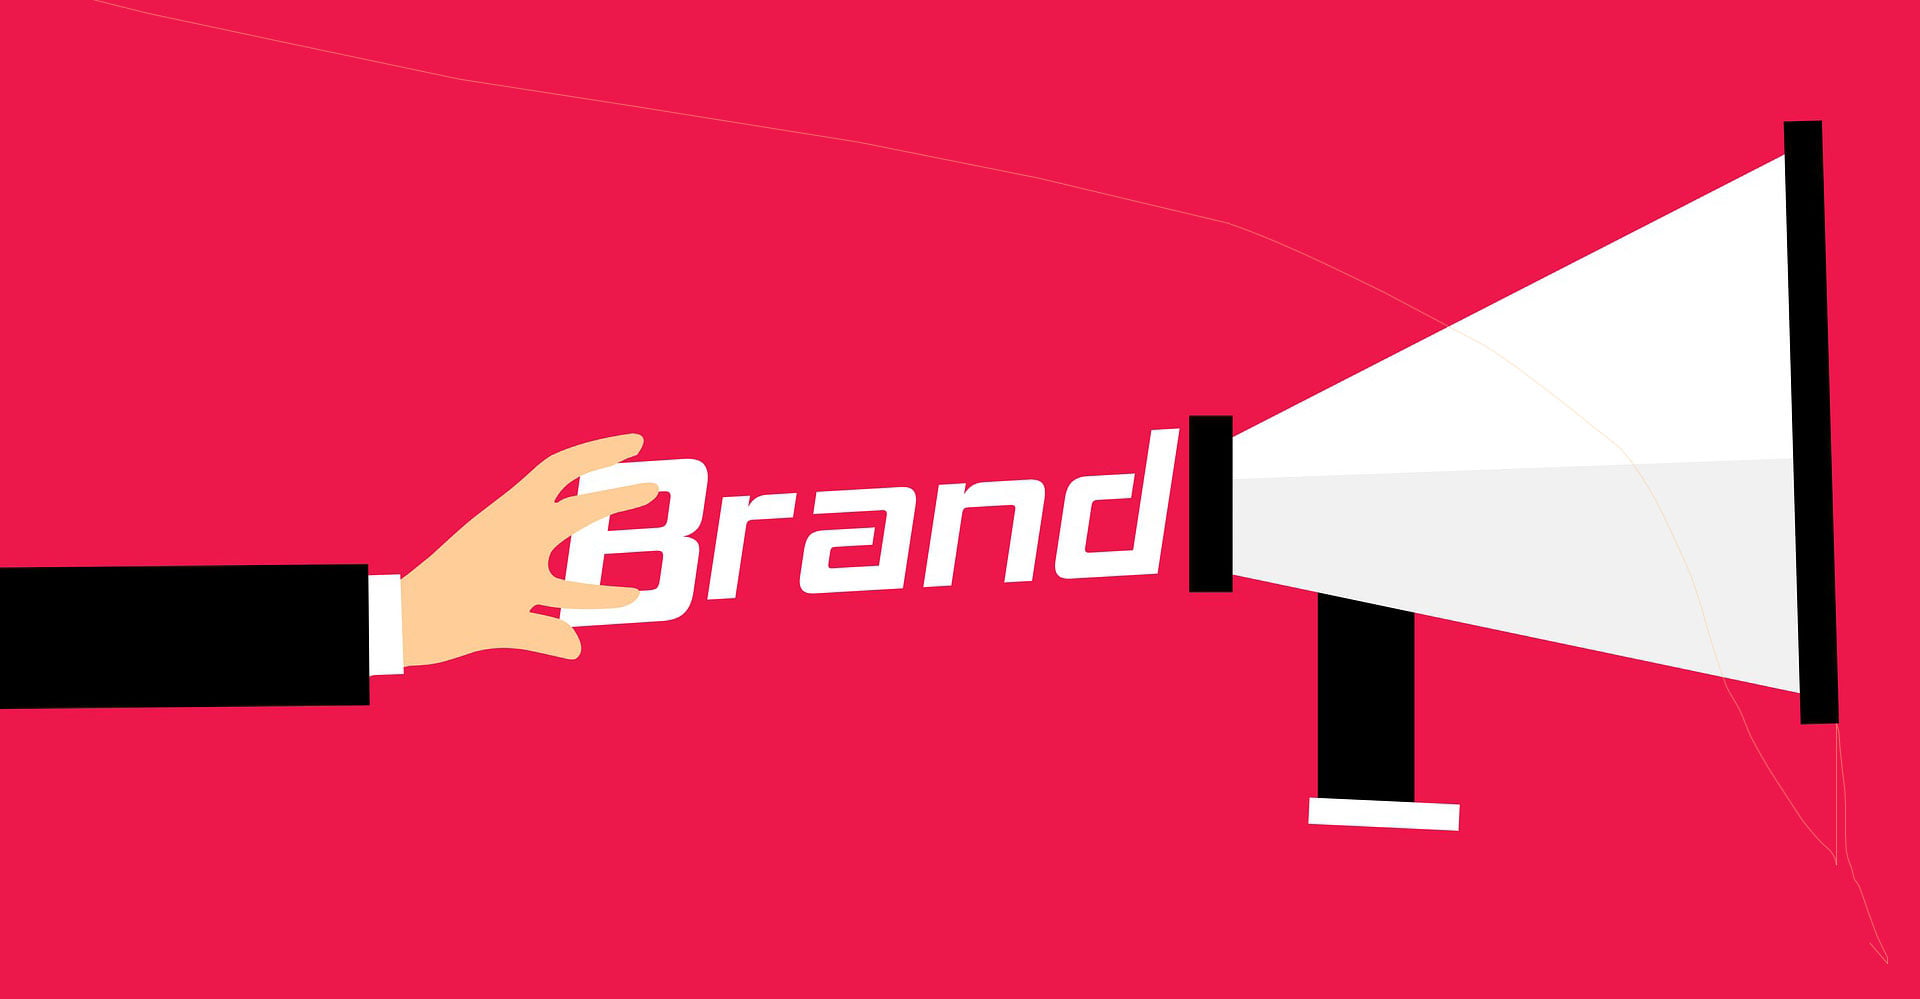 Why Brand Awareness Is Important For Your Business